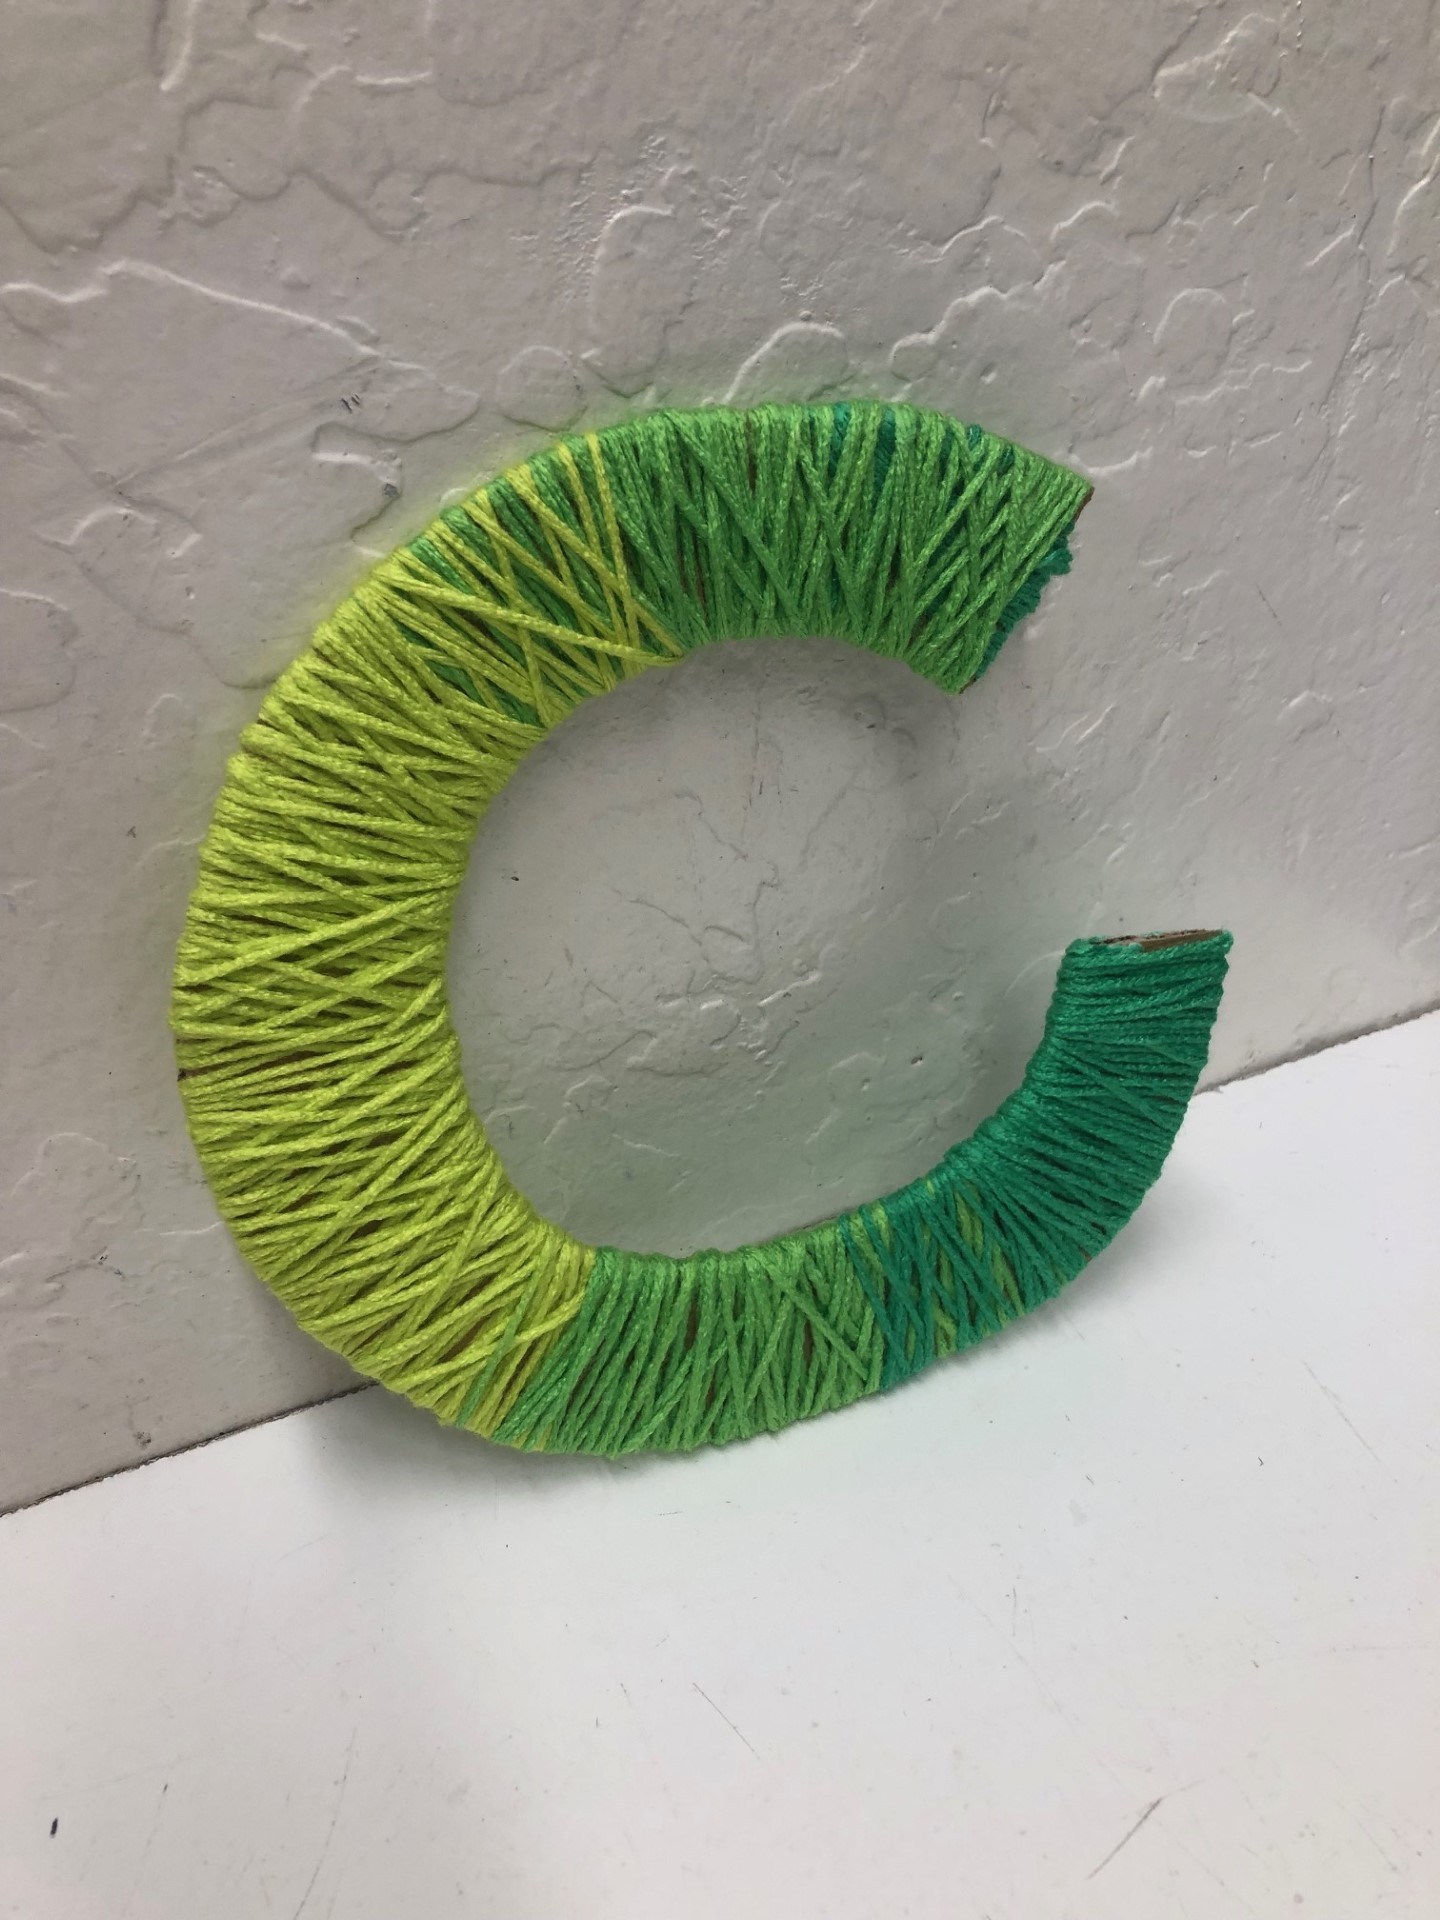 letter c wrapped in green yarn